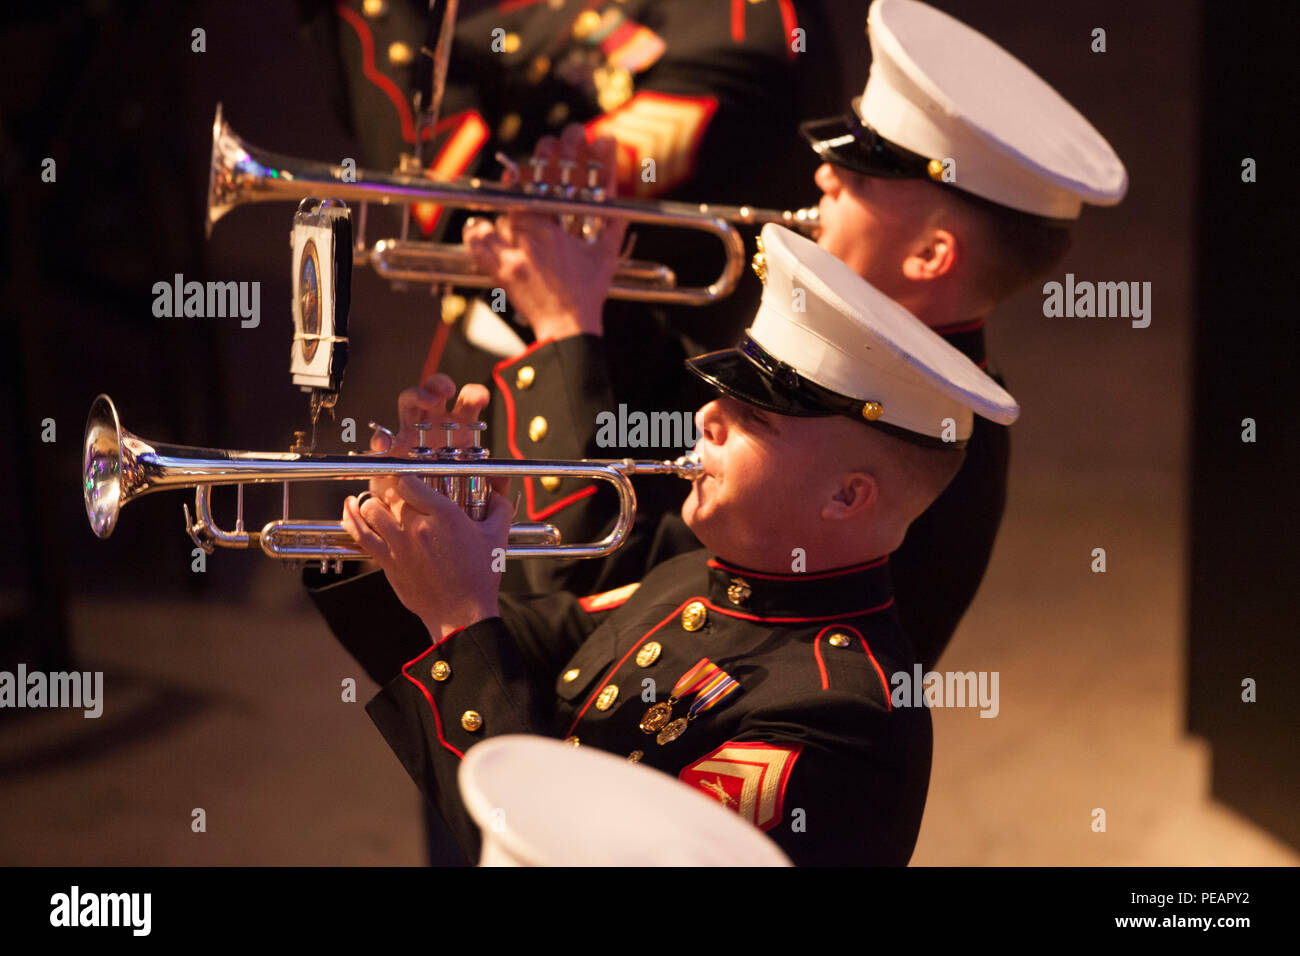 U.S. Marine Cpl. Jordan Garder, Marine Corps Band New Orleans, plays the trumpet during the band performance for the celebration of the 240th Marine Corps Birthday Ball at Mardi Gras World, New Orleans, La., Nov. 21, 2015. This year’s celebration honors those past, present, and future Marines throughout history and marks the 240th Marine Corps Birthday since its founding on Nov. 10, 1775. (U.S. Marine Corps photo by Kimberly Aguirre/Released) Stock Photo